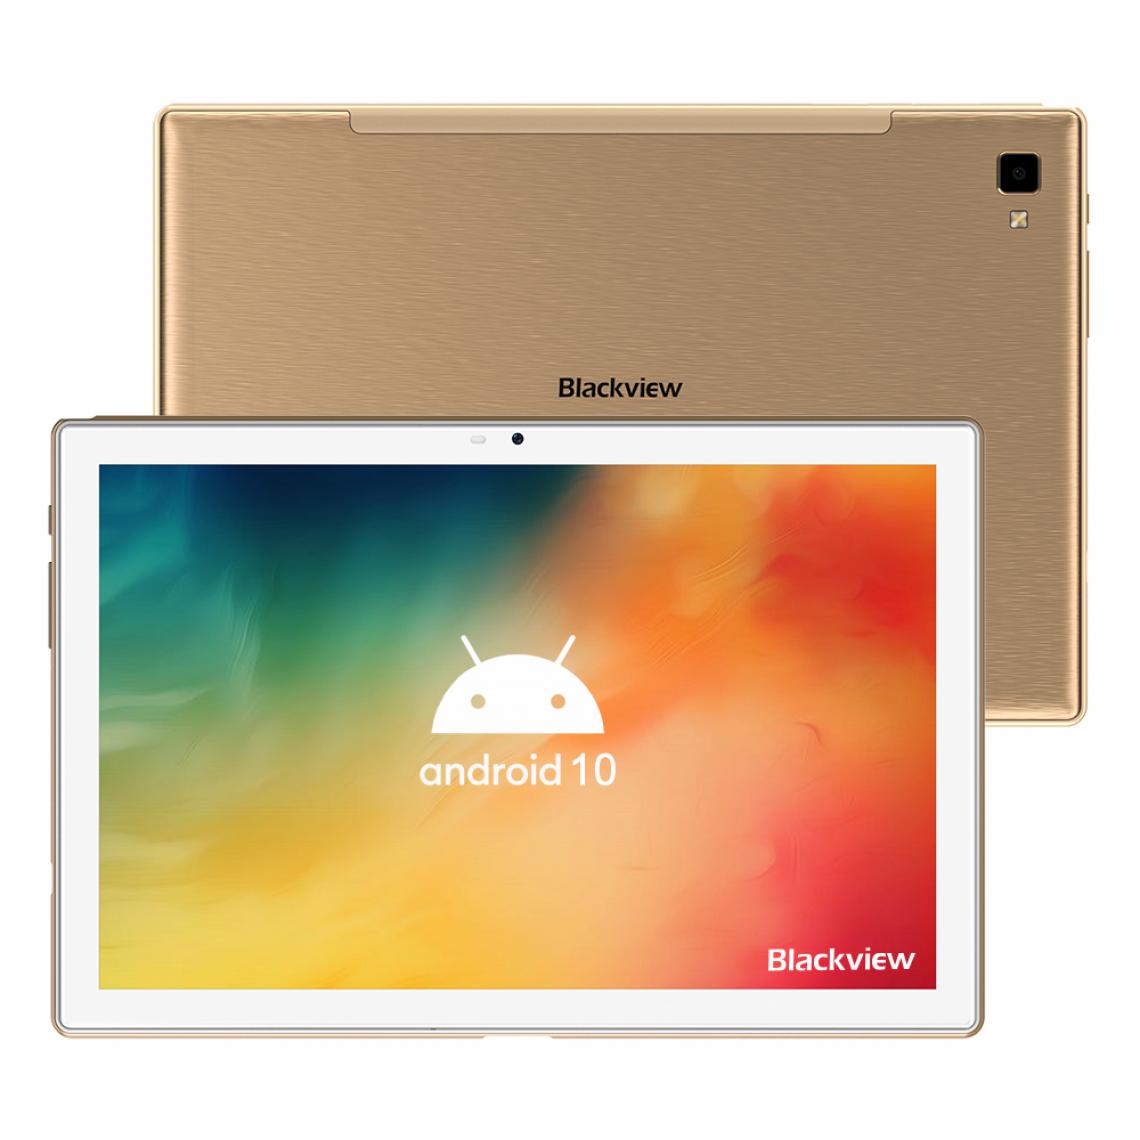 Blackview - Tablette Tactile - Blackview Tab 8 - 64 Go- 4G LTE/WiFi 10.1" - or - Tablette Android